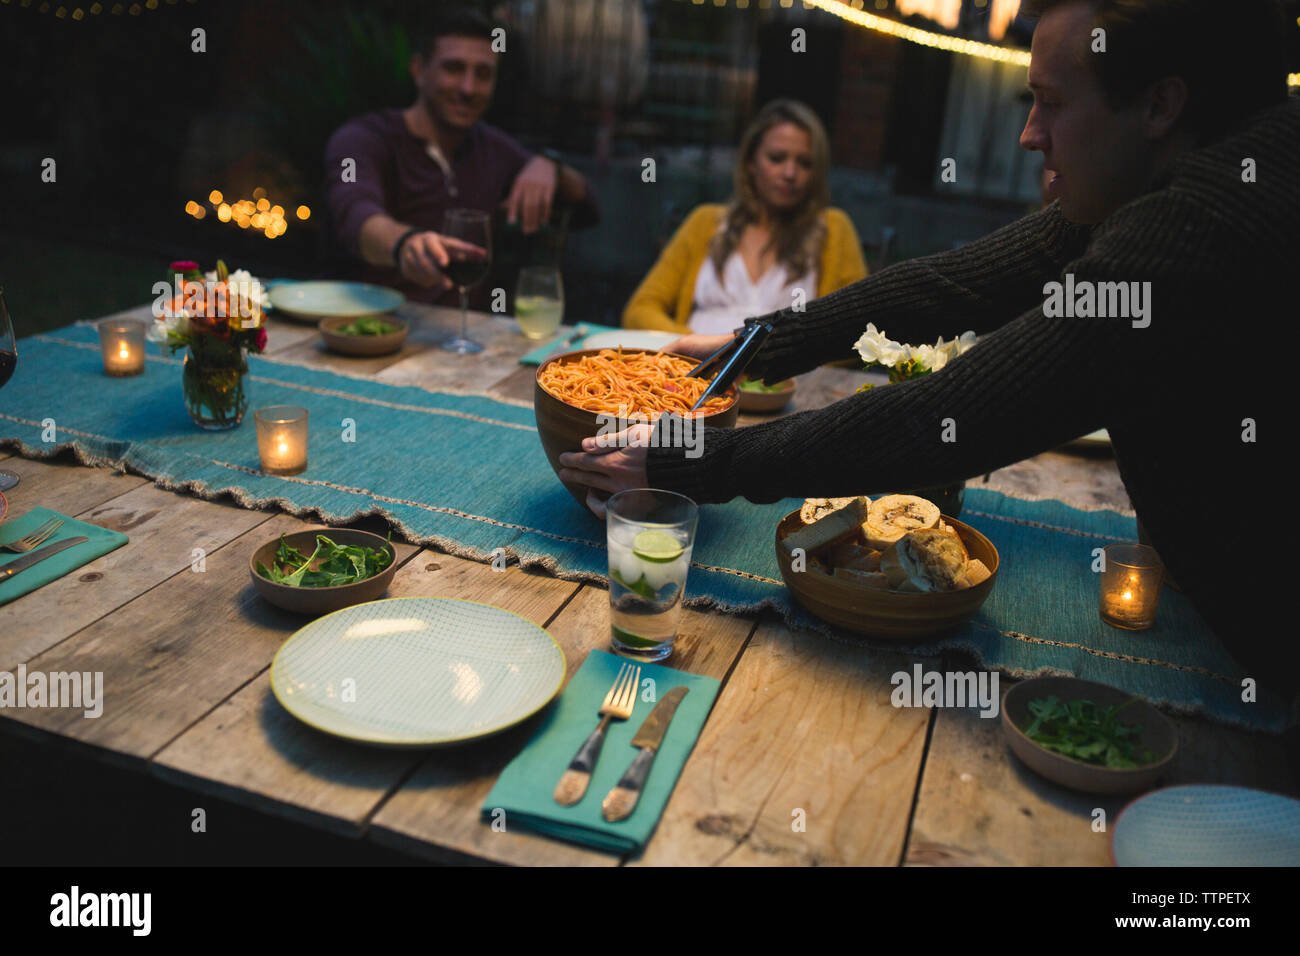 Man keeping bowl on table while during dinner with friends at patio Stock Photo